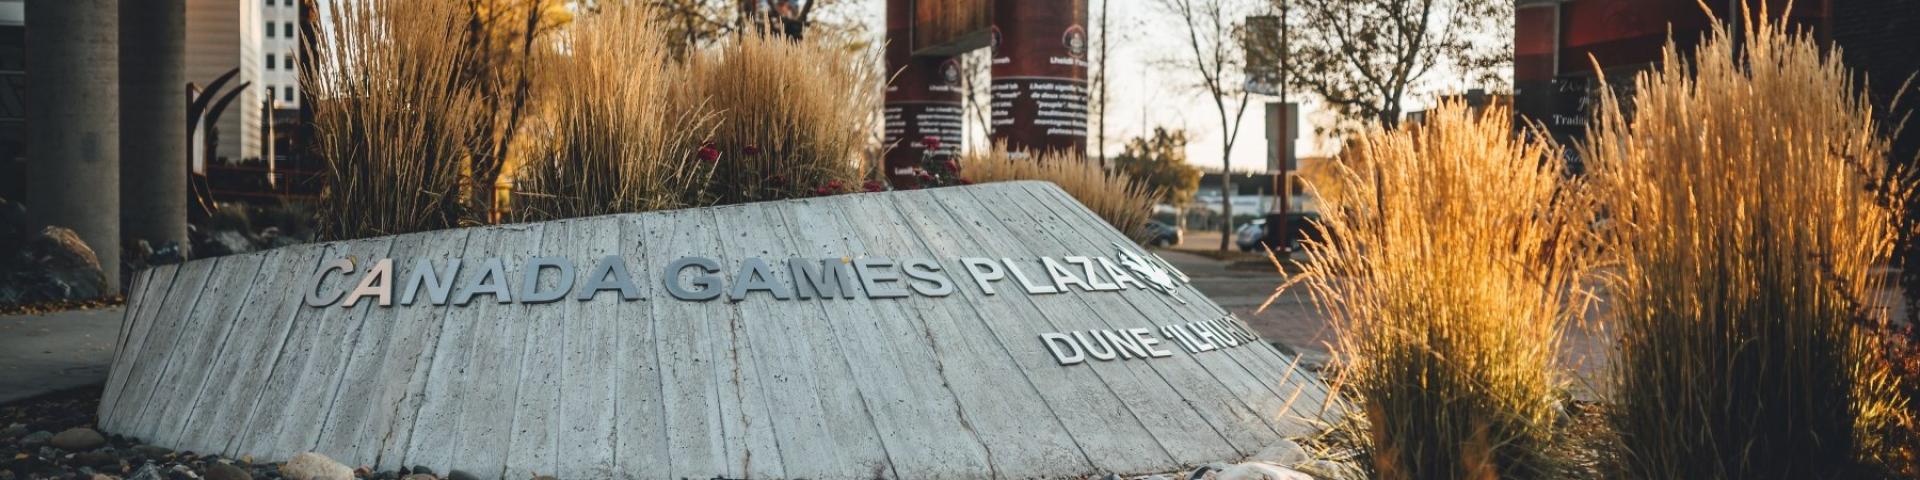 Metal text that reads "Canada Games Plaza" written on cement protrusion in garden area